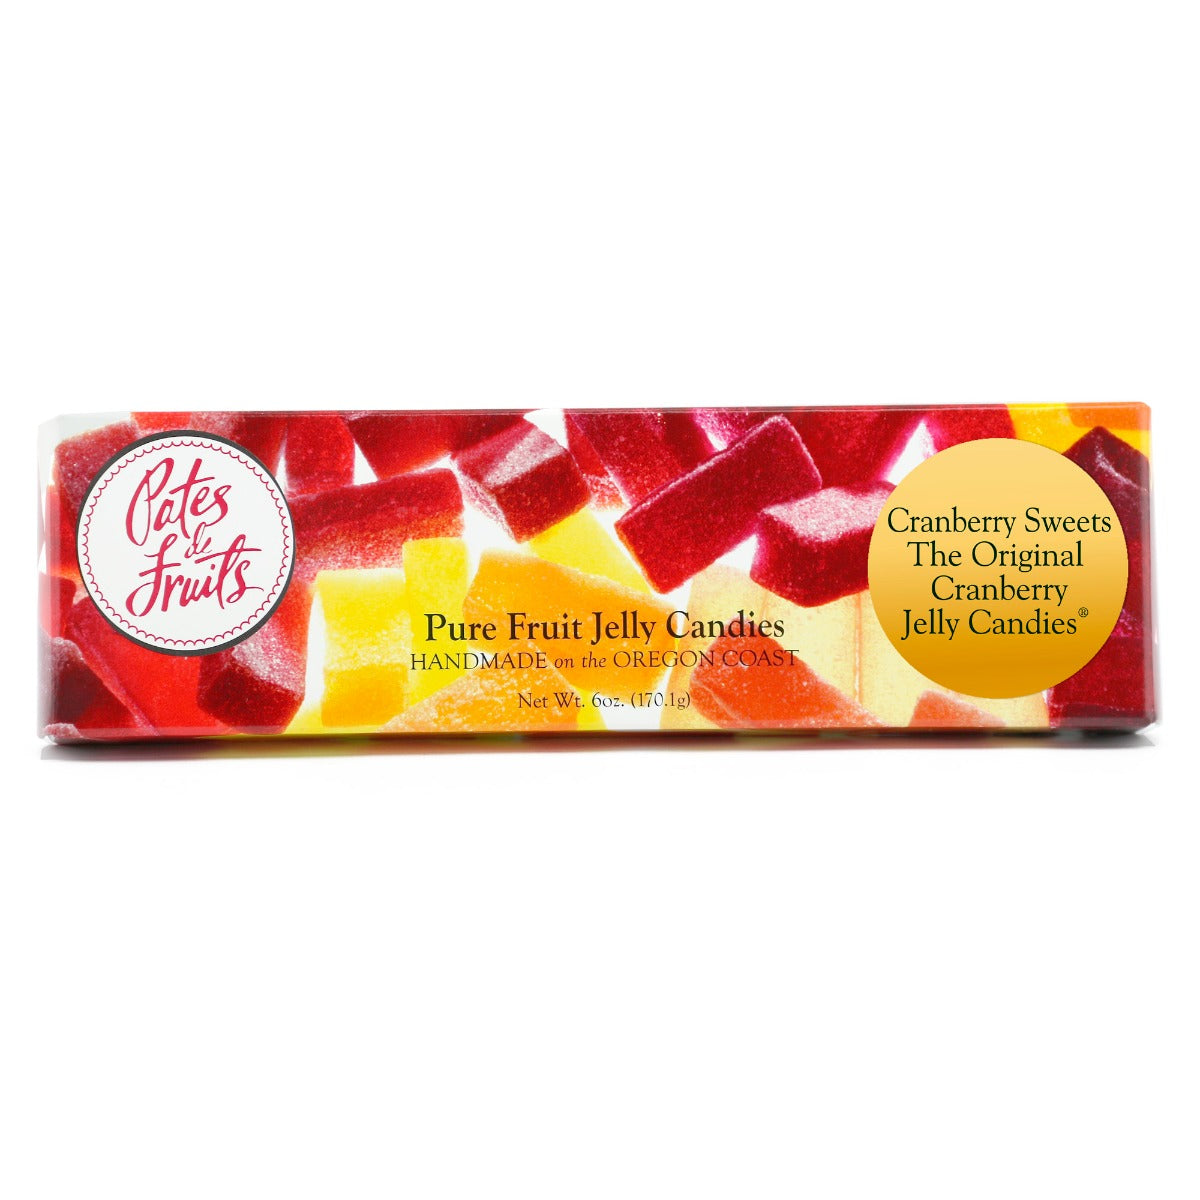 Original Cranberry Jelly Candies without Walnuts 6oz.